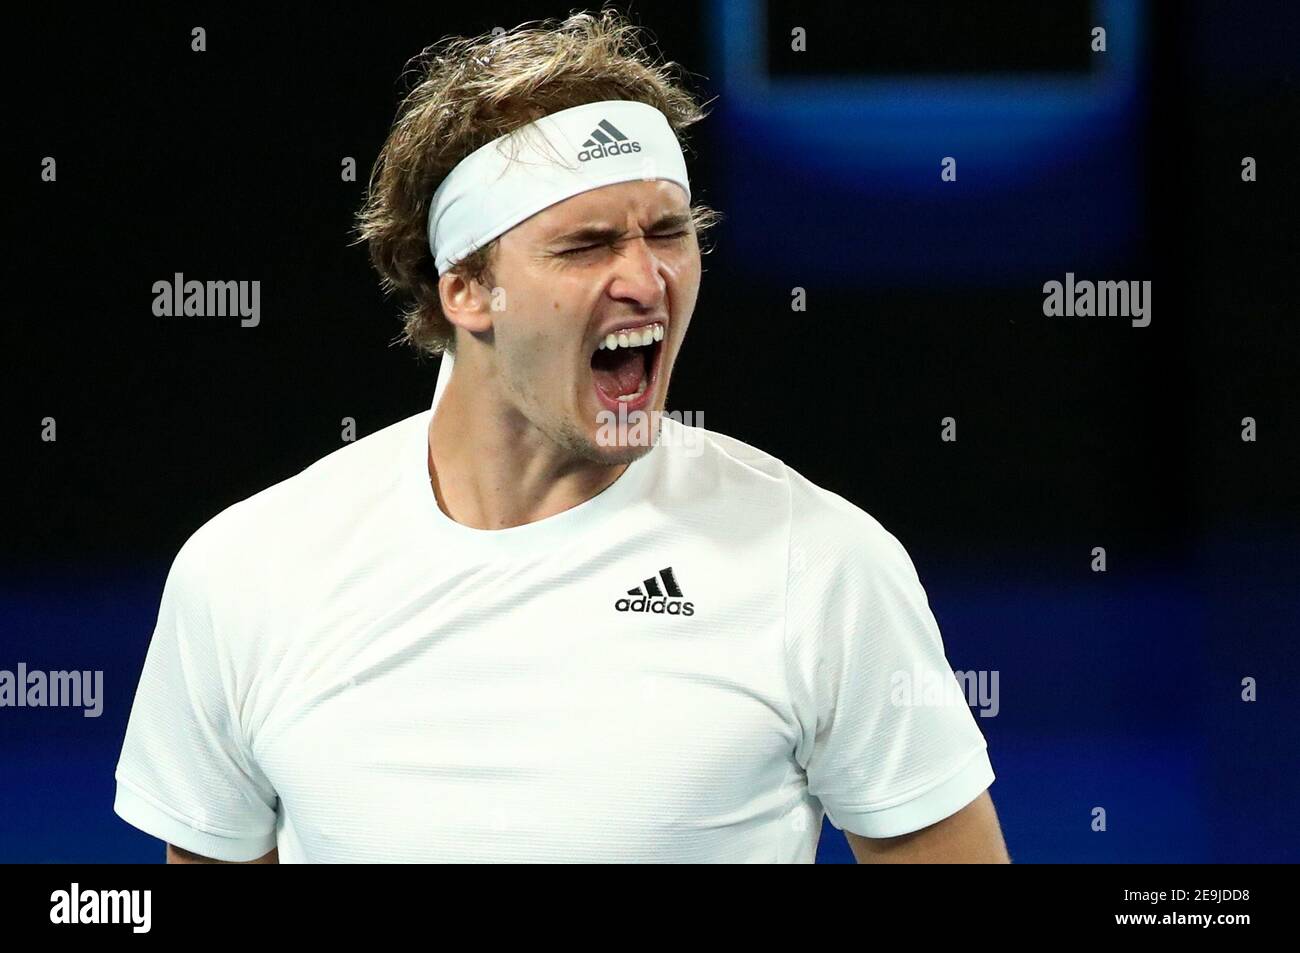 Tennis - ATP Cup - Melbourne Park, Melbourne, Australia, February 5, 2021  Germany's Alexander Zverev reacts during his group stage doubles match with  Jan-Lennard Struff against Serbia's Novak Djokovic and Nikola Cacic